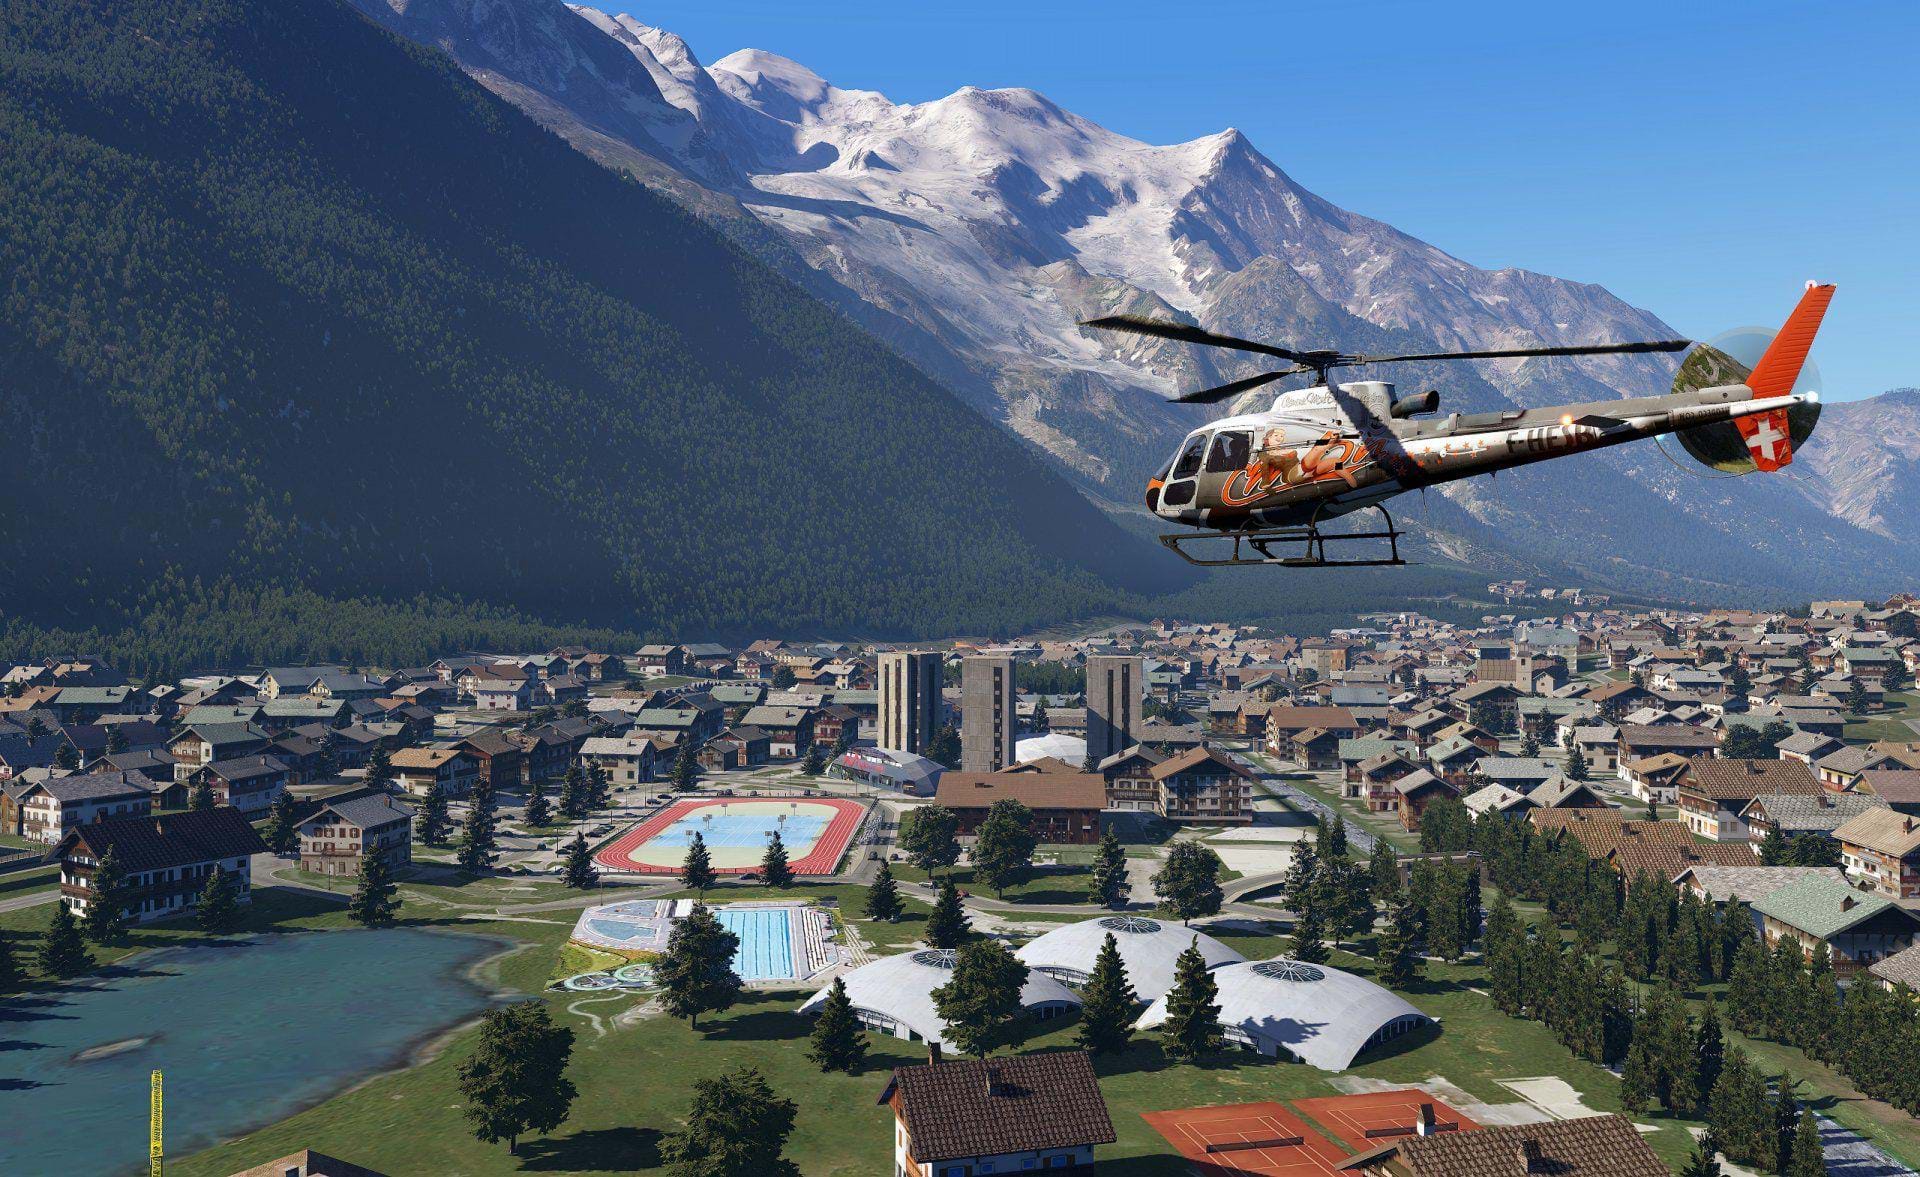 Frank Dainese and Fabio Bellini Mont Blanc for X-Plane - Chamomix